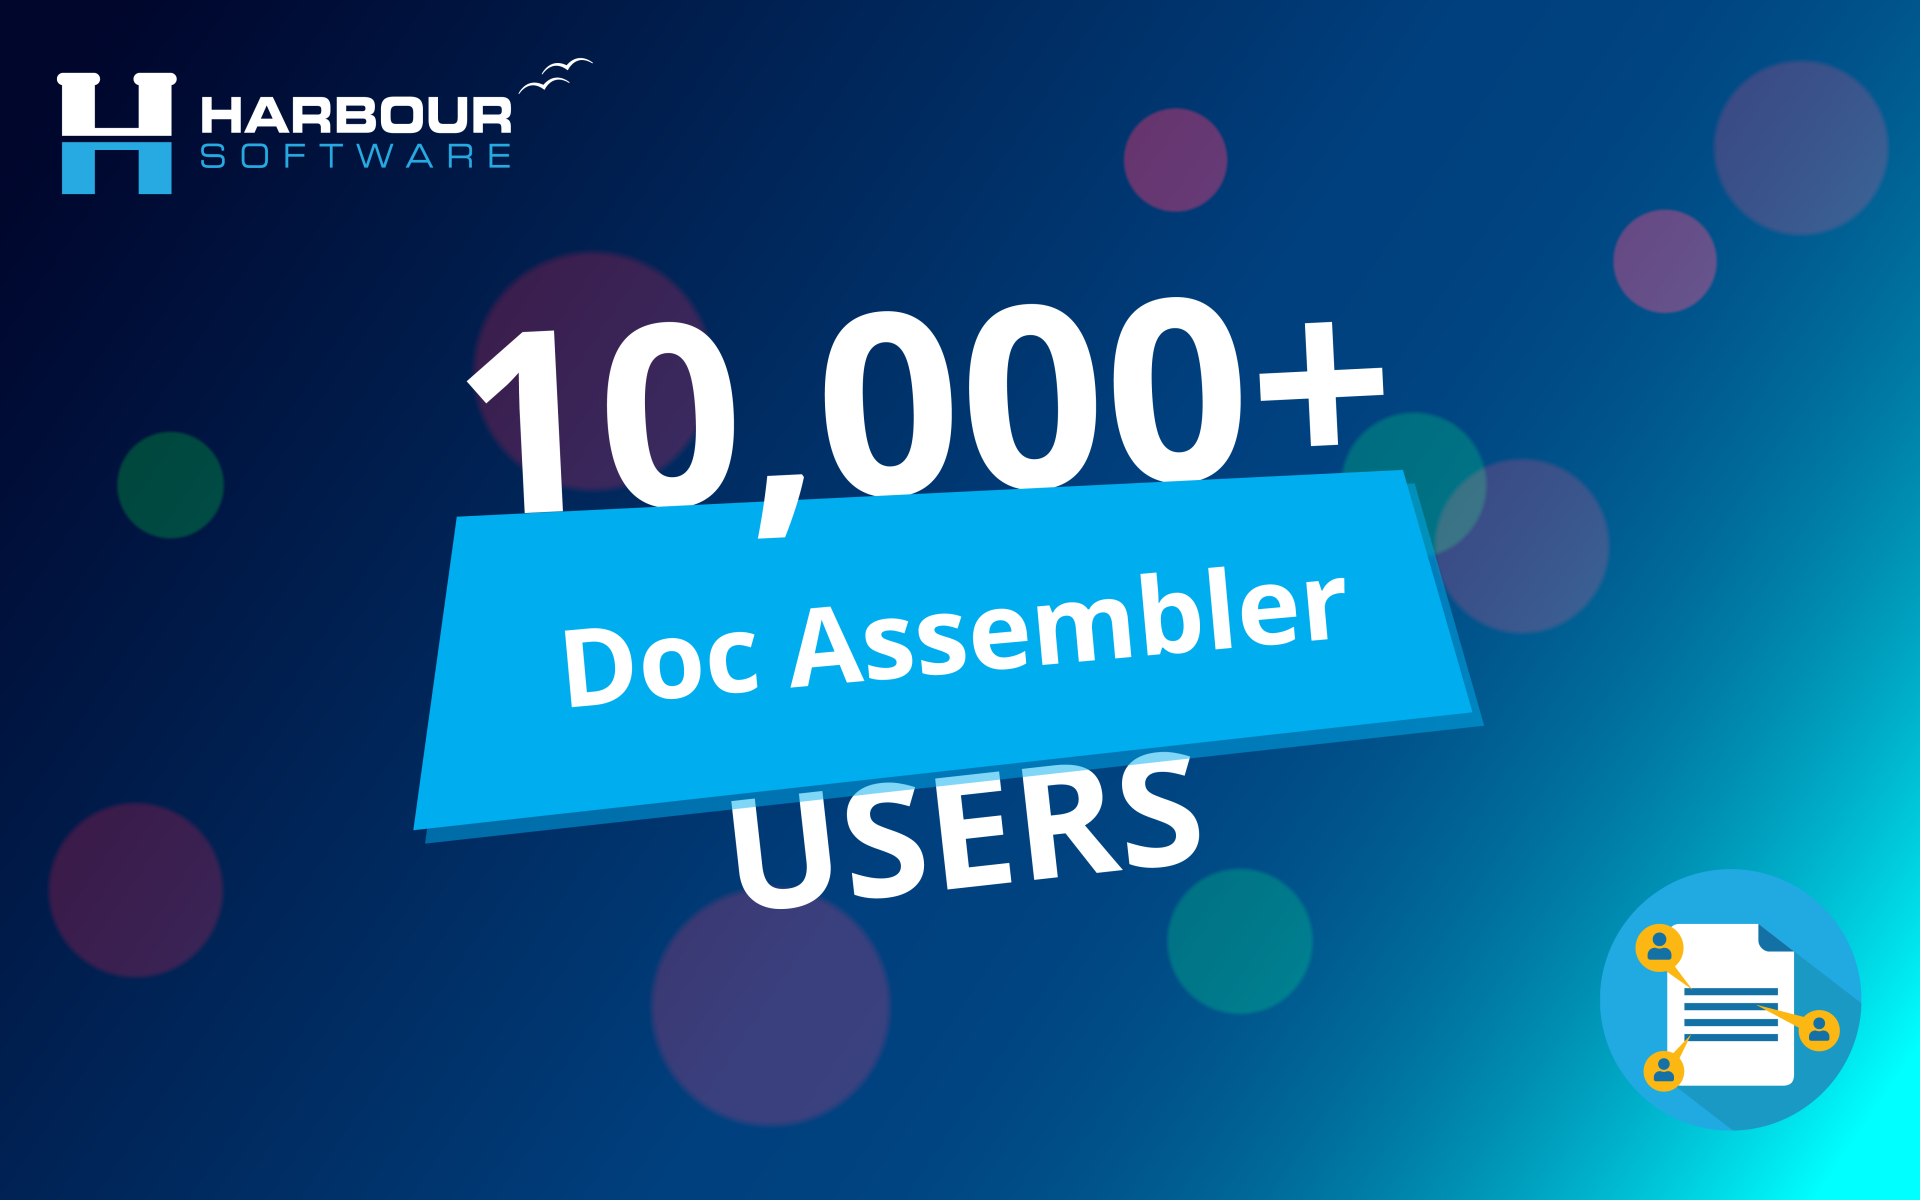 Doc Assembler reaches over 10,000 individual users